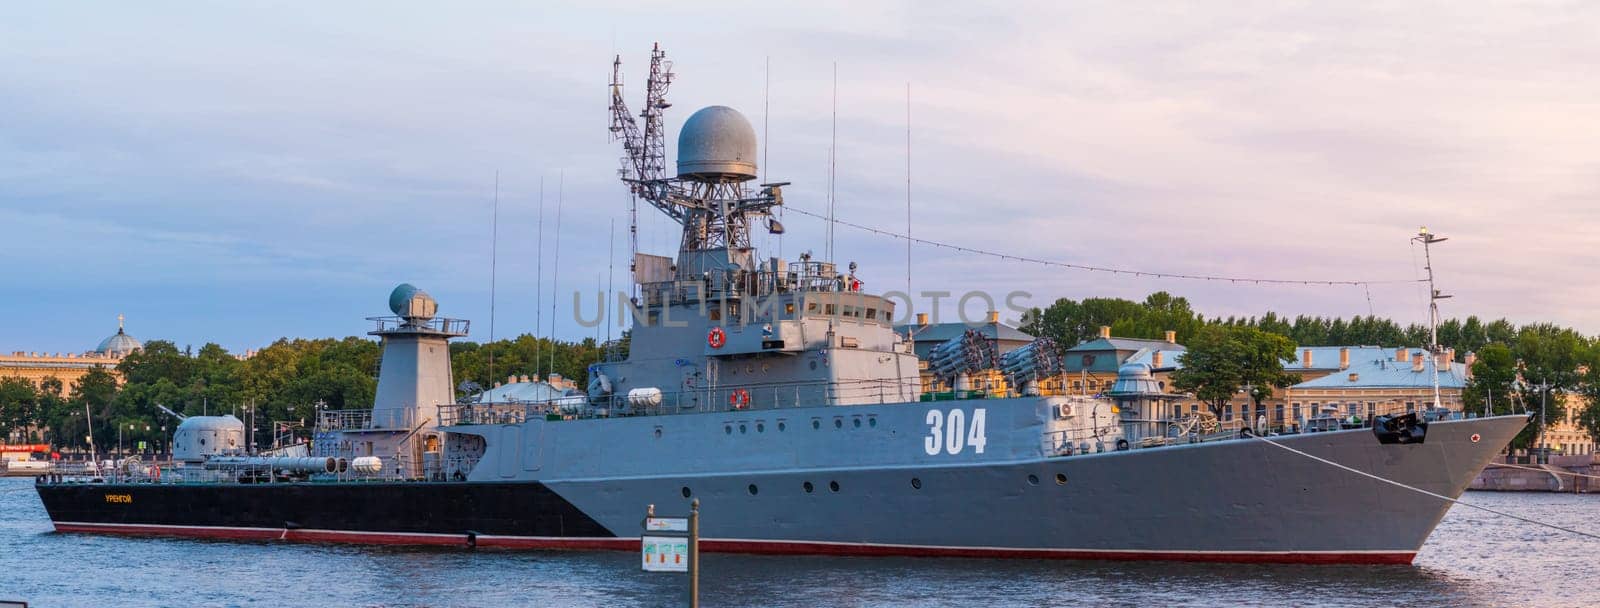 Small anti-submarine ship of project 133.1 Urengoy in Neva river at summer morning in Saint-Petersburg, Russia - July 22, 2015